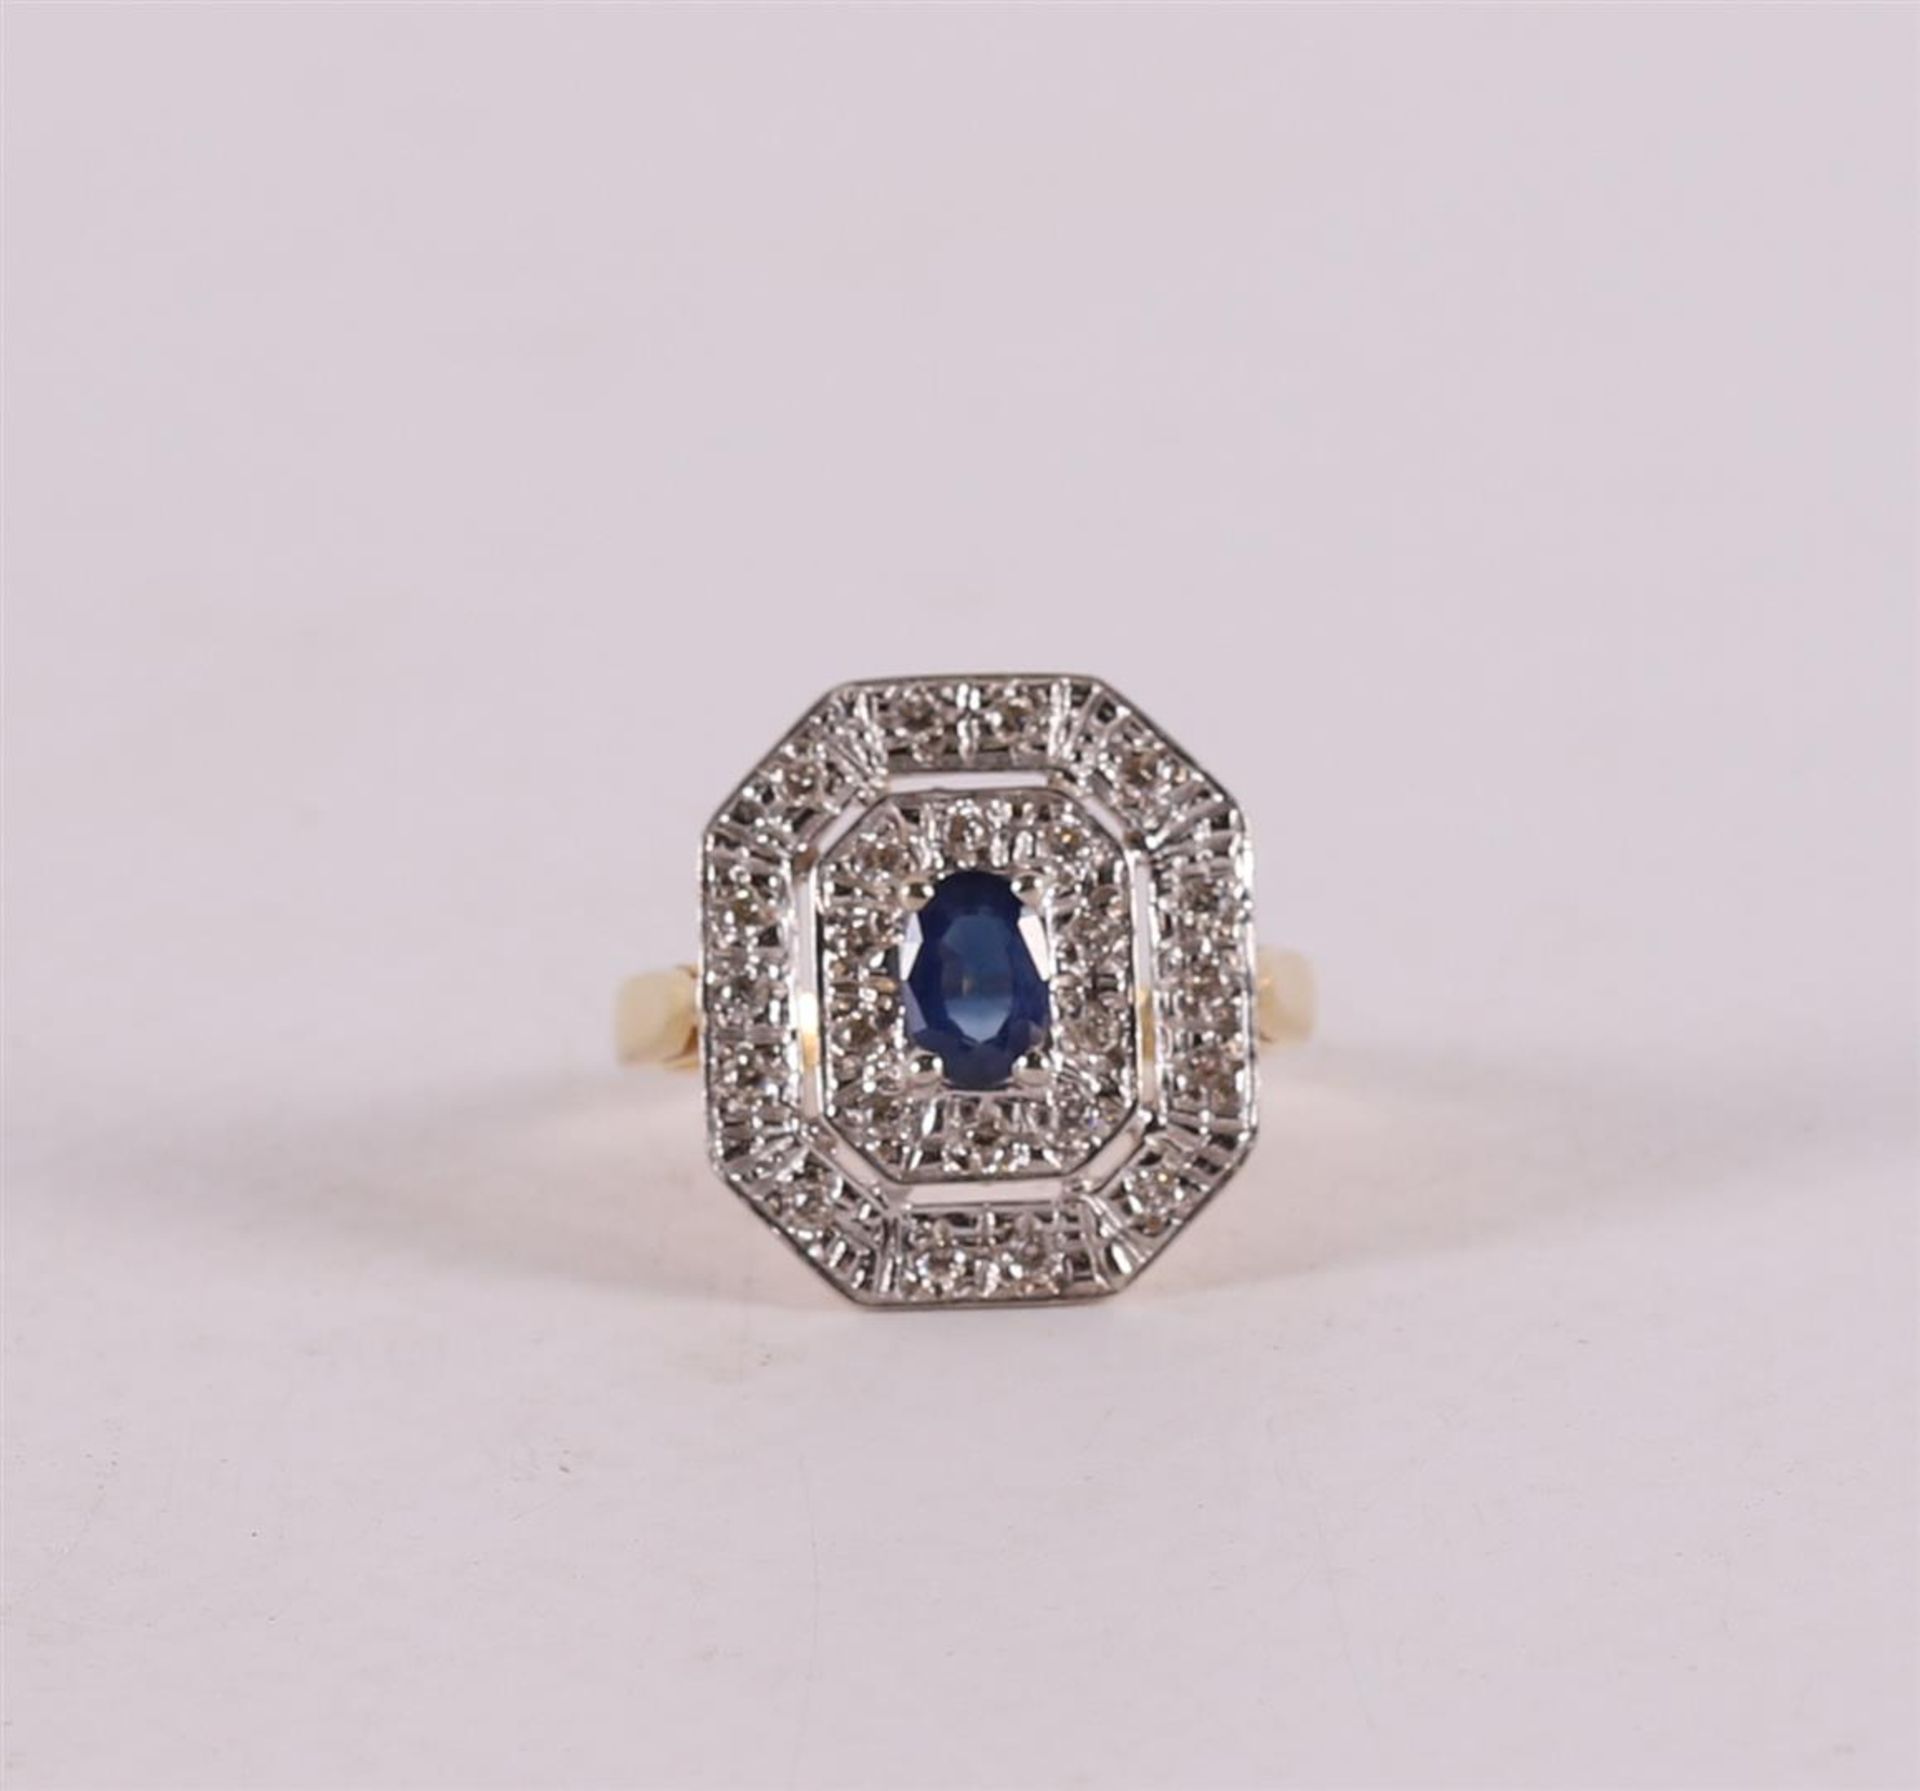 An 18 kt gold ring with a facet cut blue sapphire and 24 diamonds